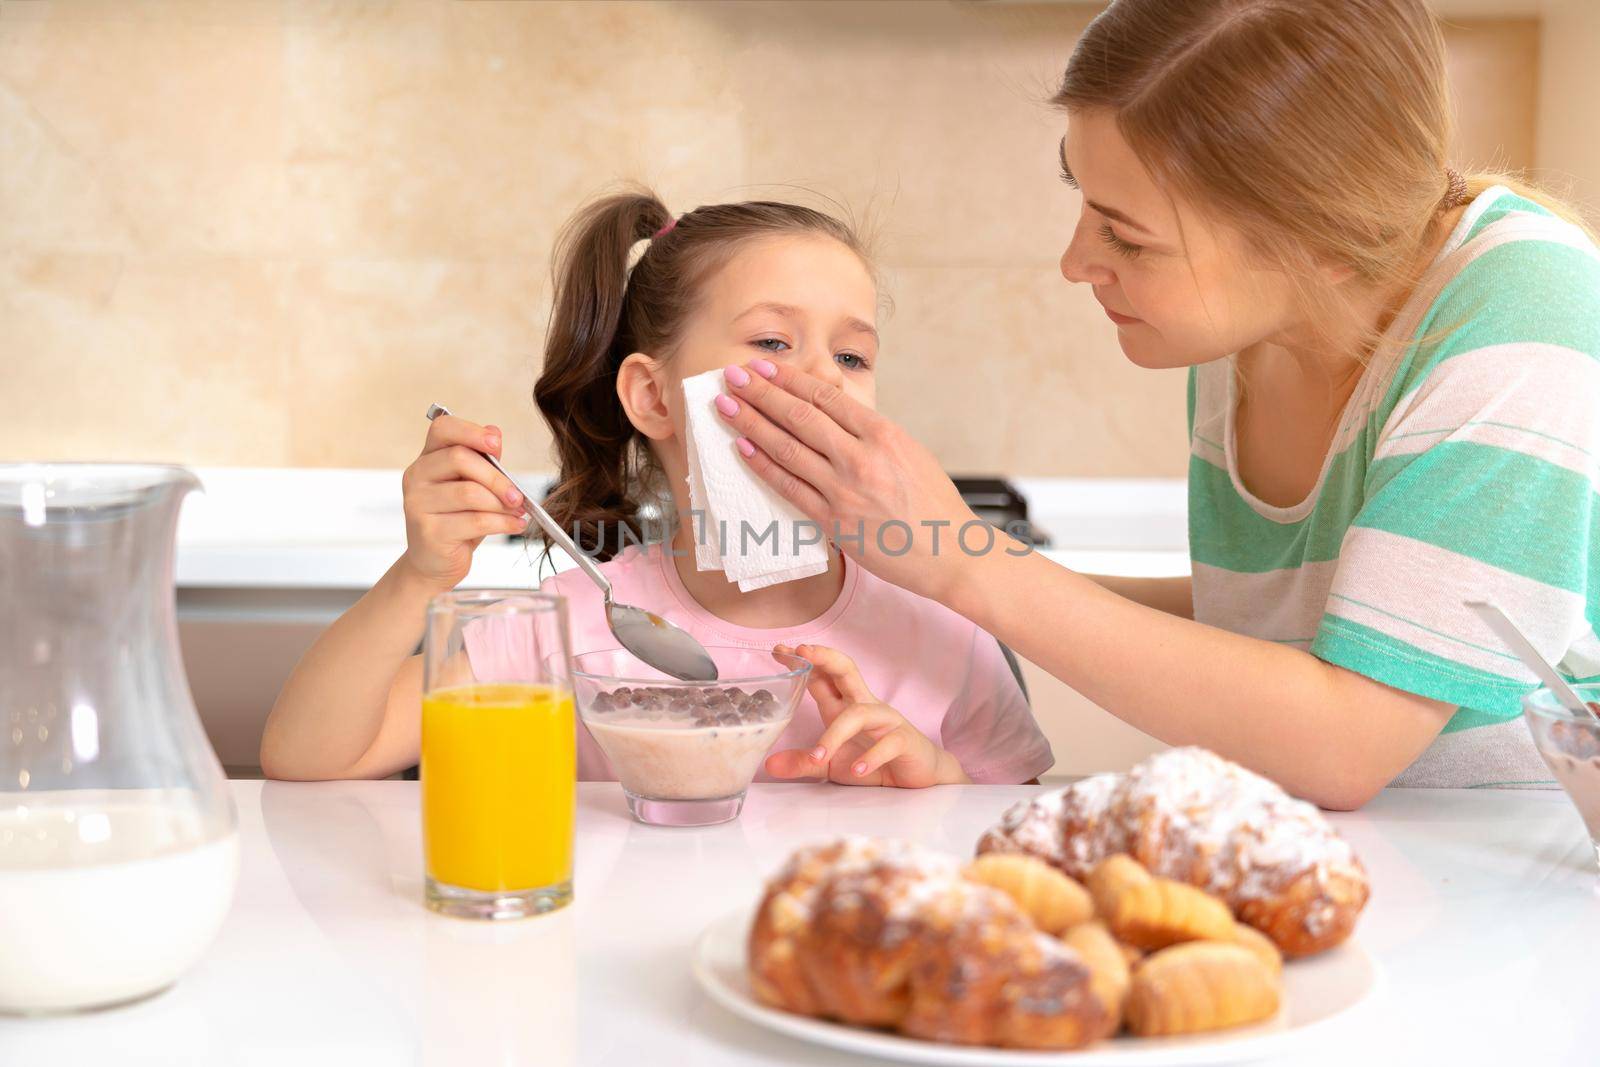 Mother having breakfast with her daughter at a table in kitchen, happy single mother concept by Mariakray